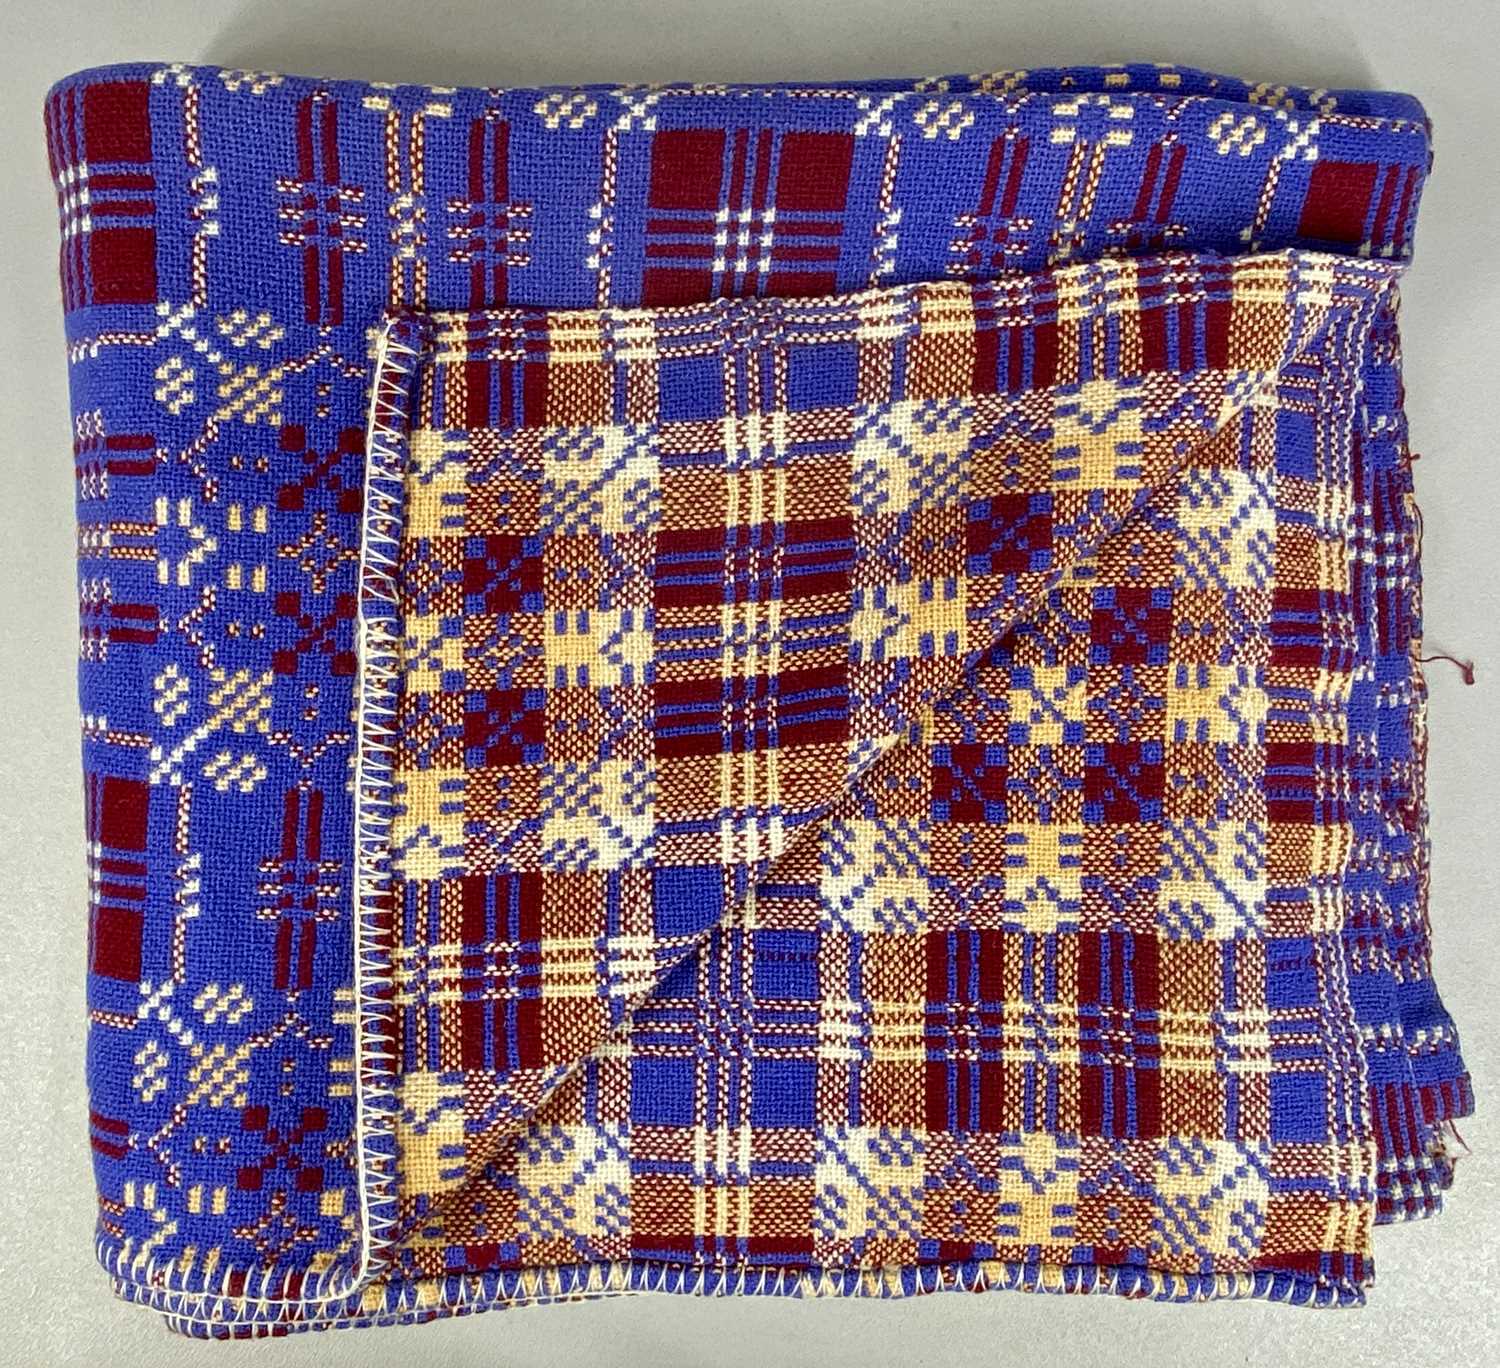 VINTAGE HOLYTEX PURE VIRGIN WOOL WELSH BLANKET, blue, purple, cream double sided, approx. 188 x - Image 3 of 5